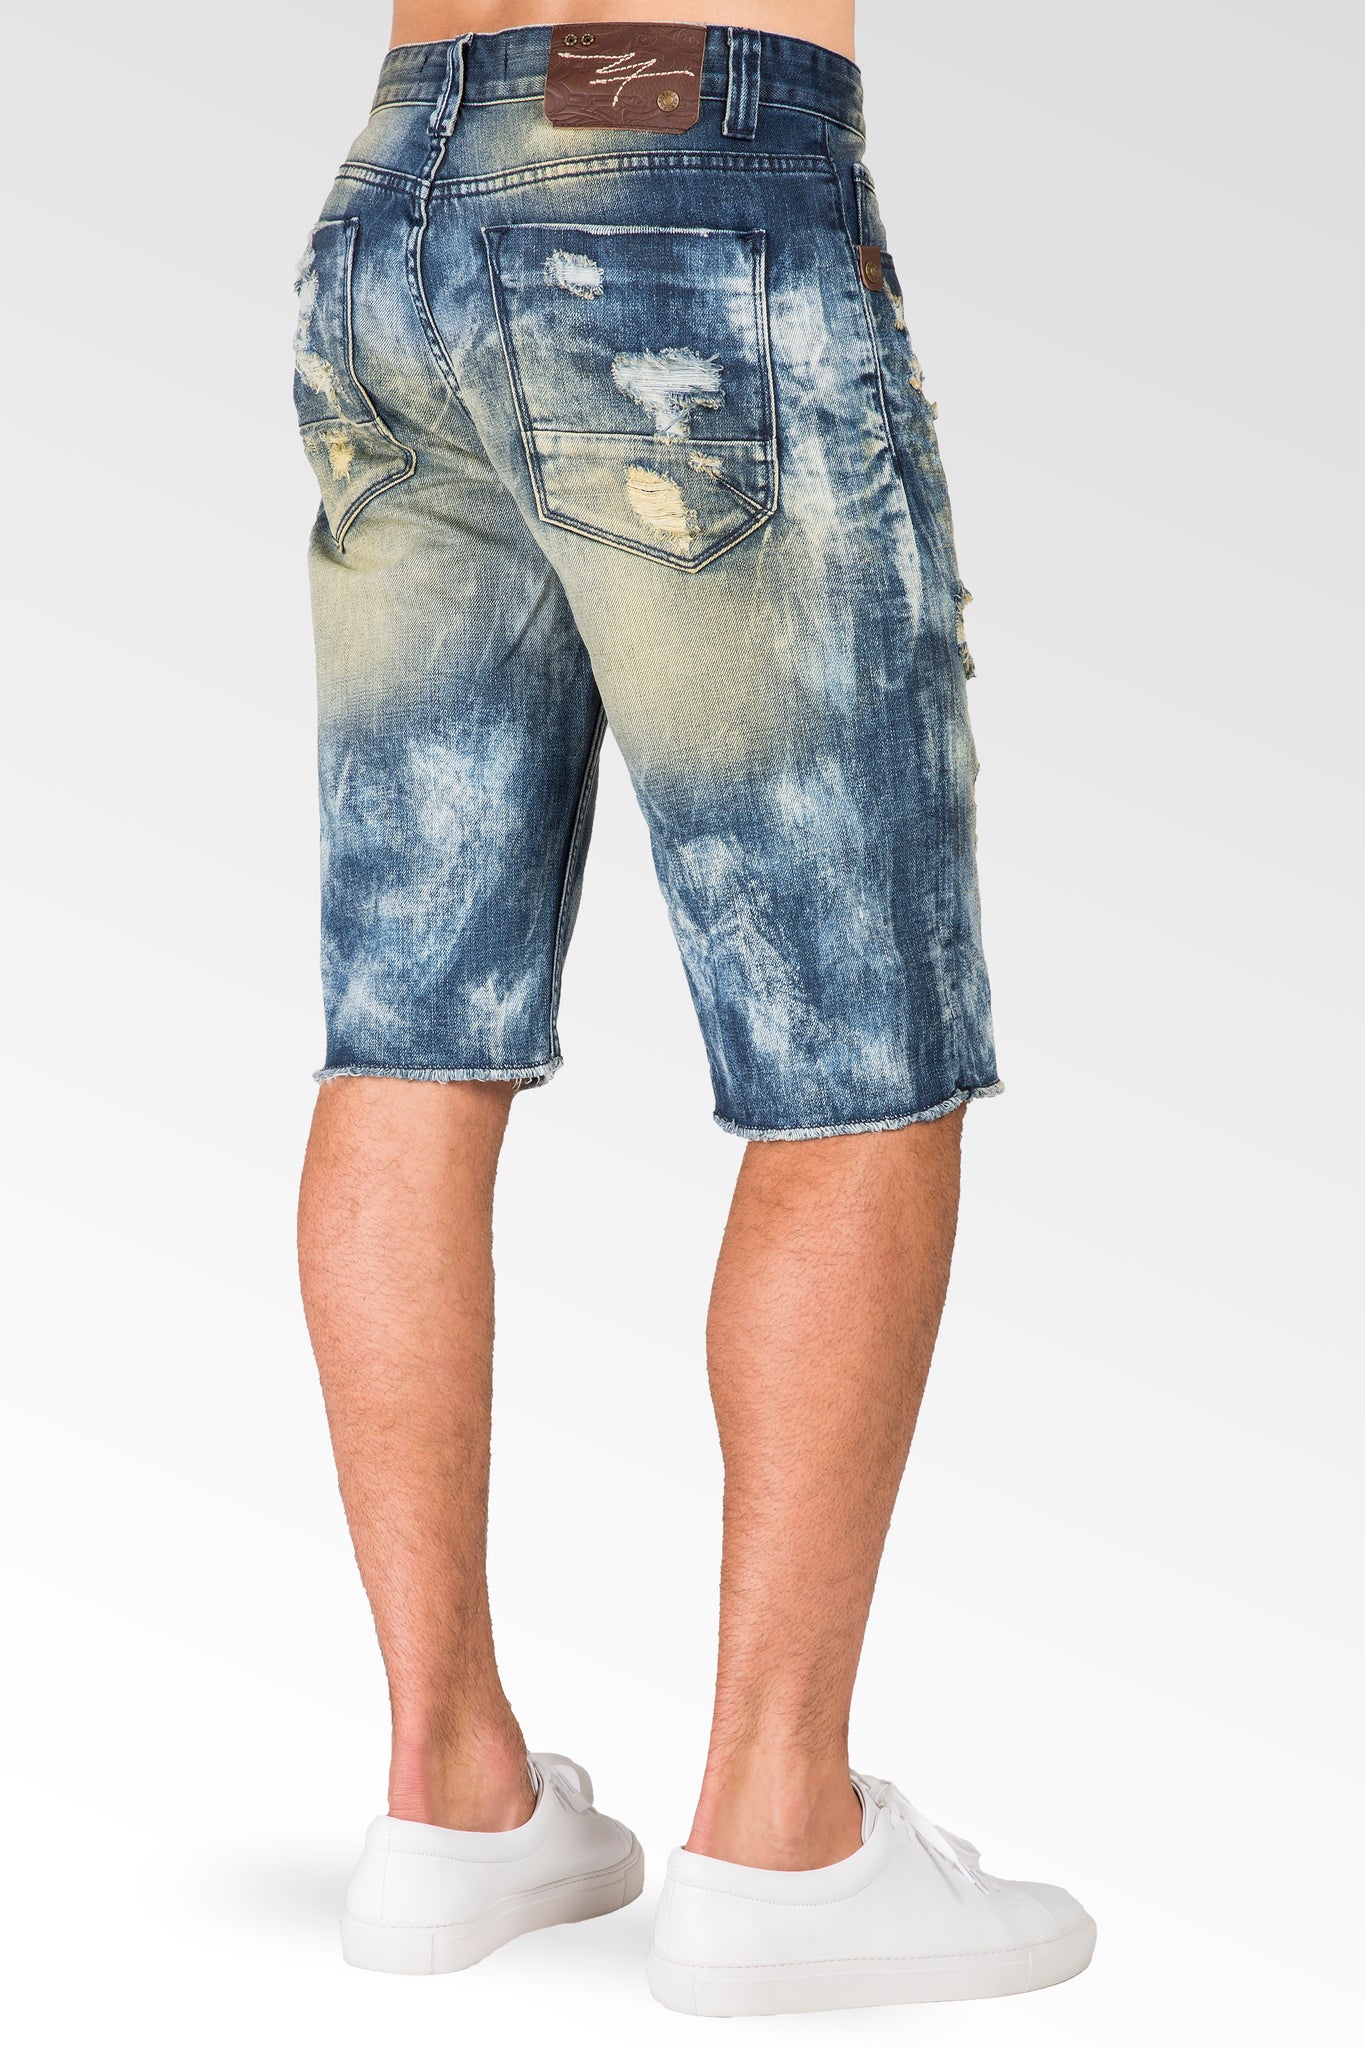 Relaxed Premium Denim 13" Cut Off 5 Pocket Shorts Tainted Destroyed & Mended